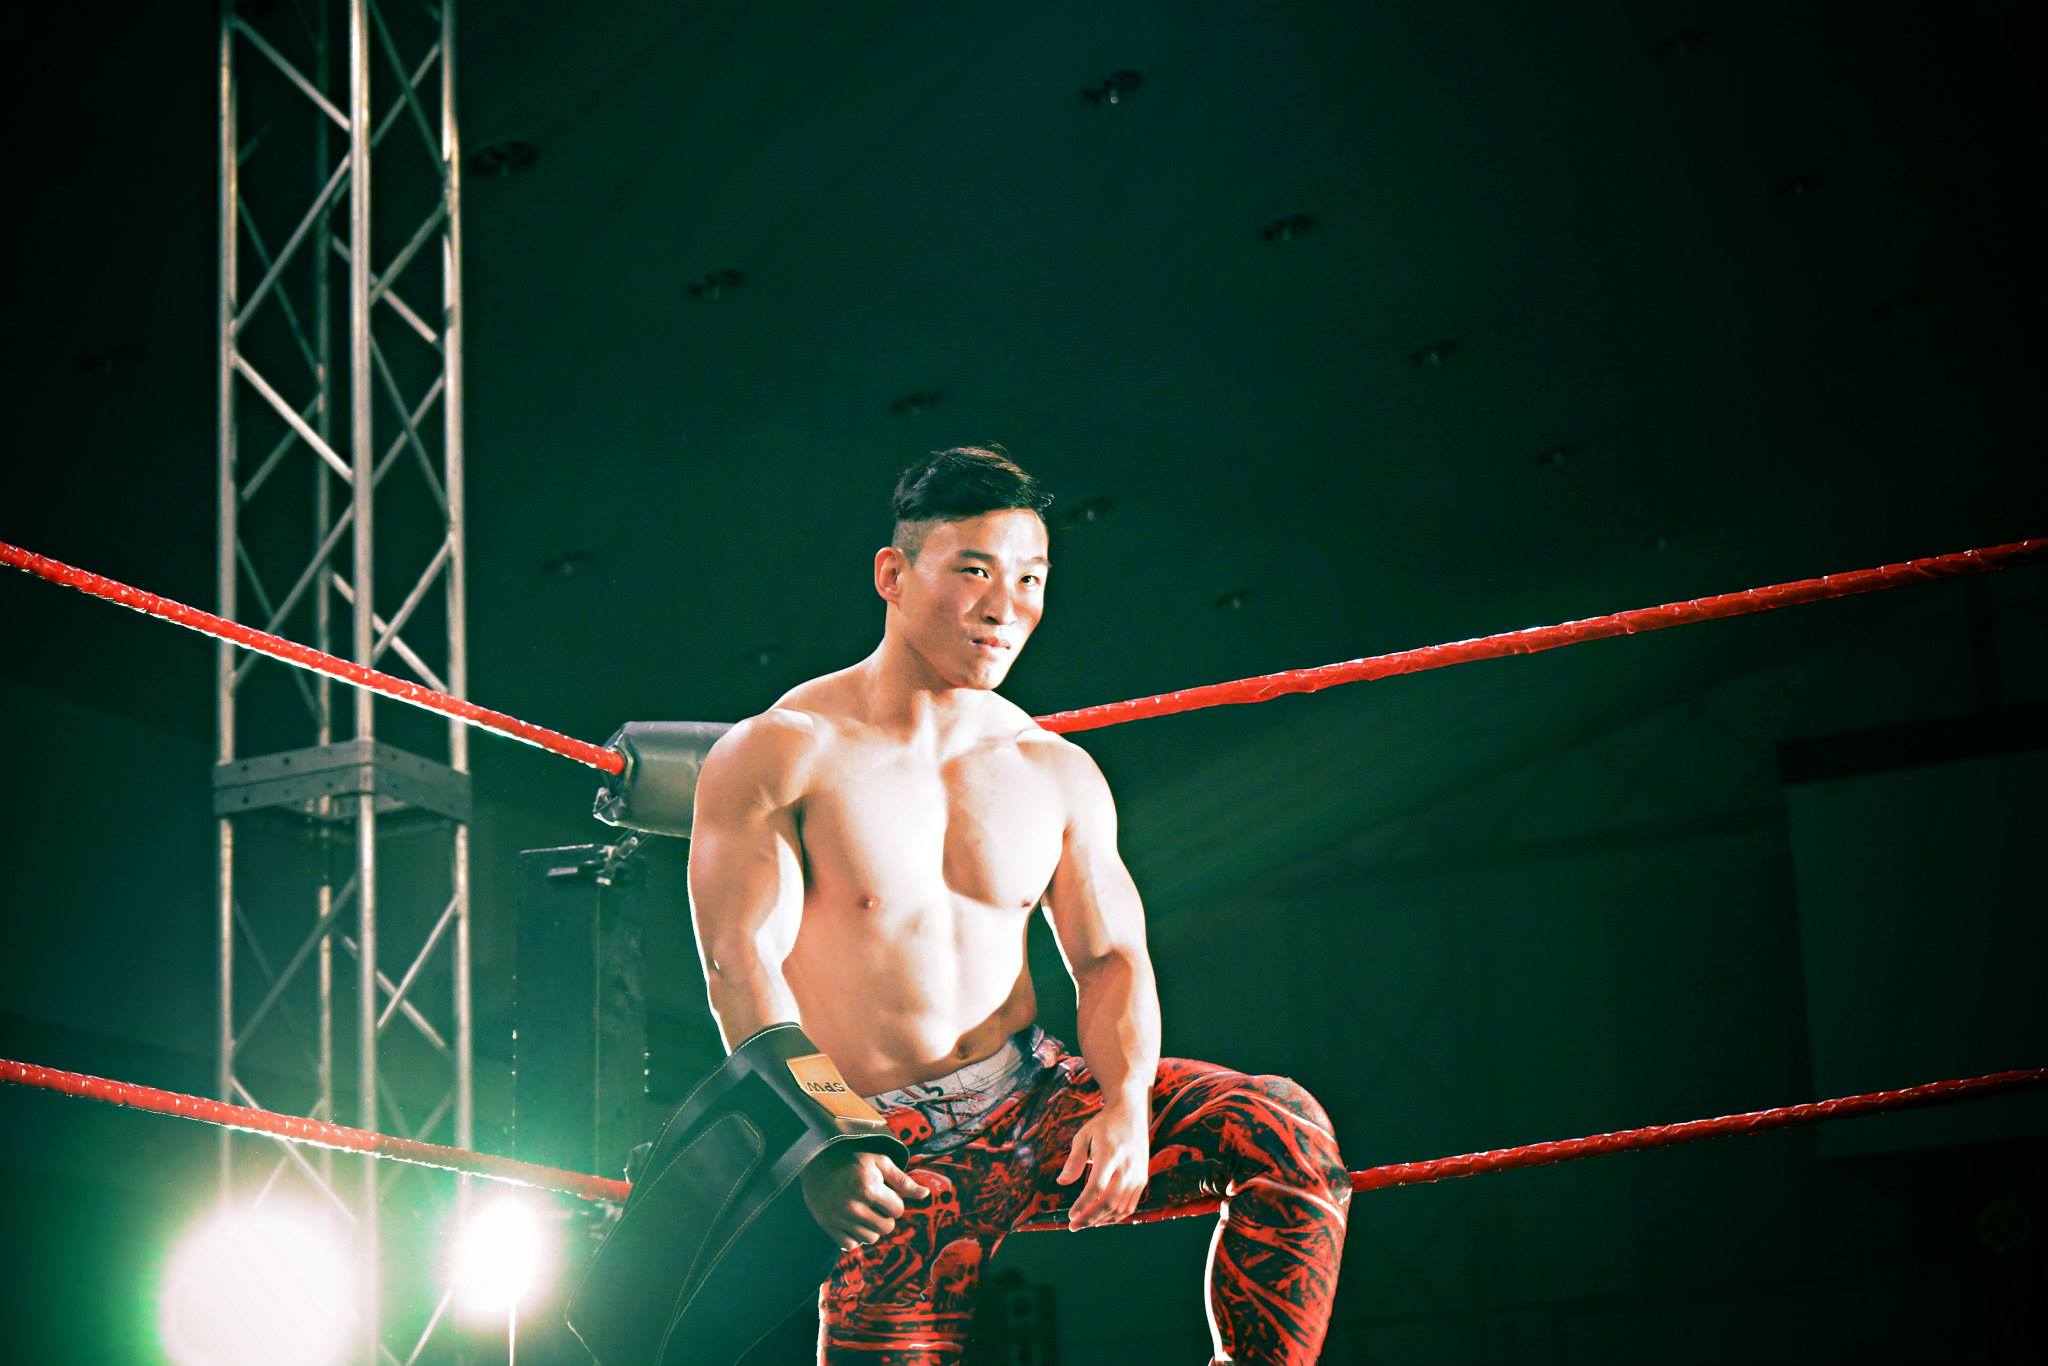 SPW champions makes his MKW debut